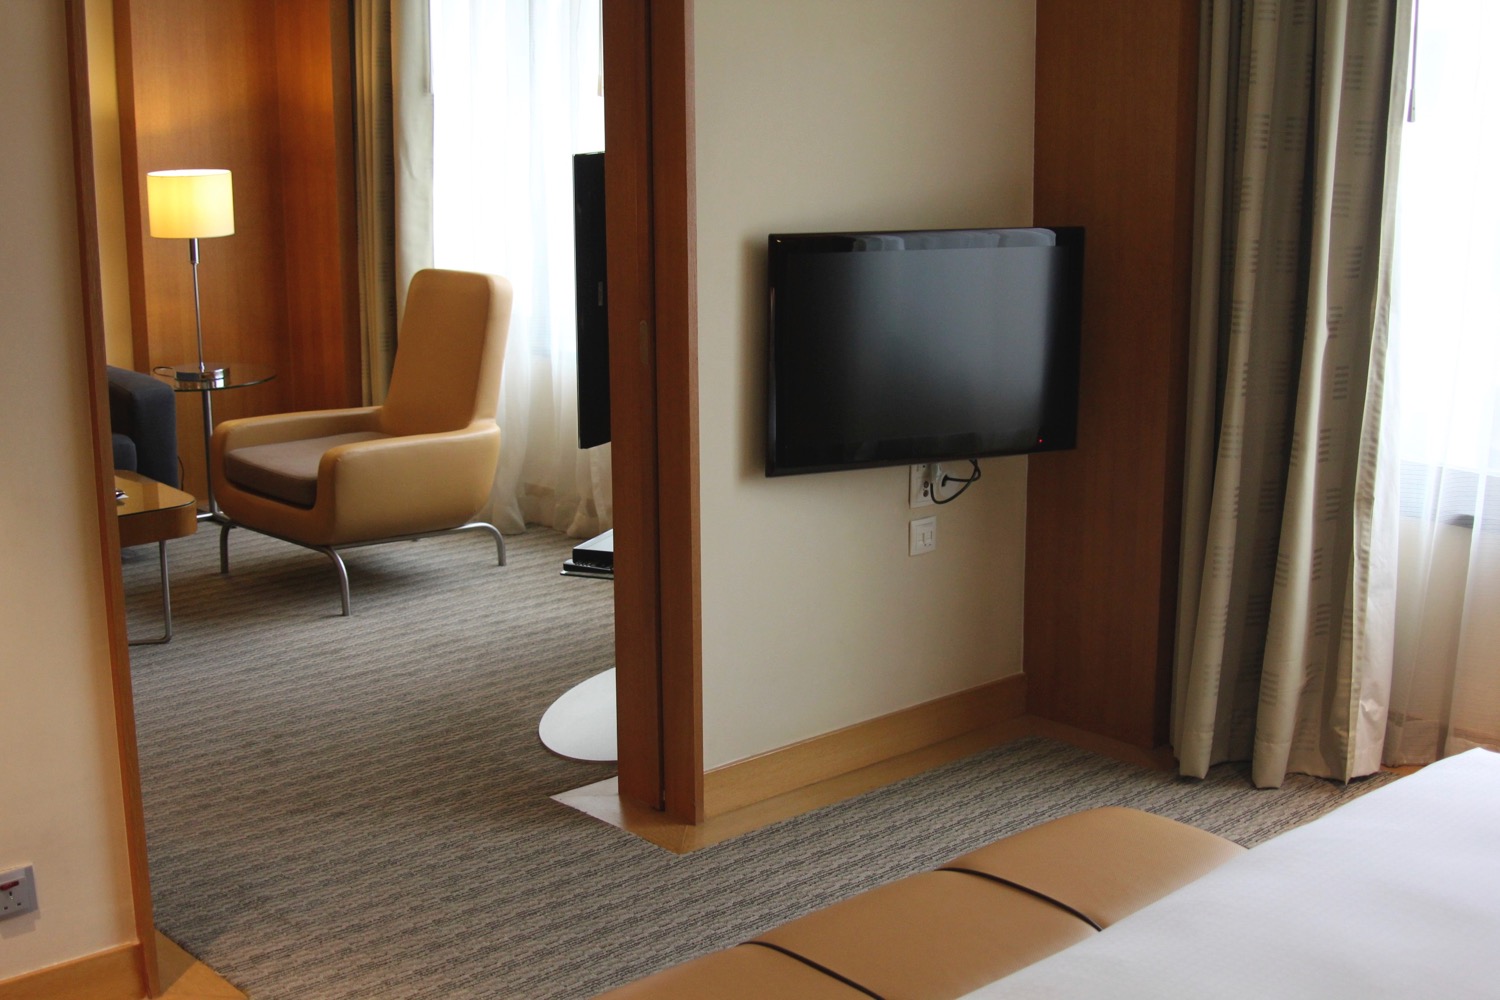 a tv on the wall in a hotel room